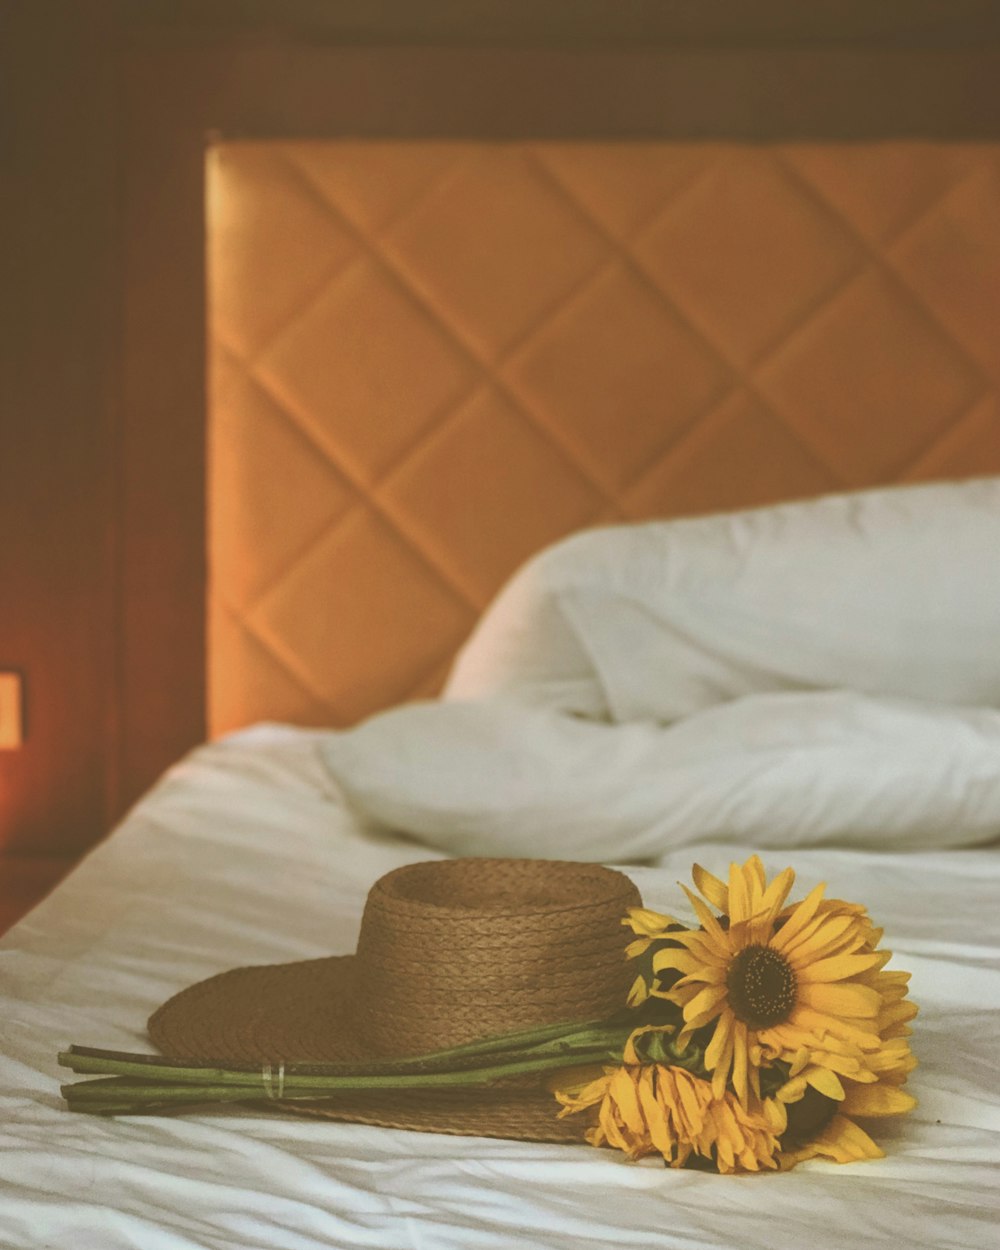 yellow sunflower beside brown sun hat on bed